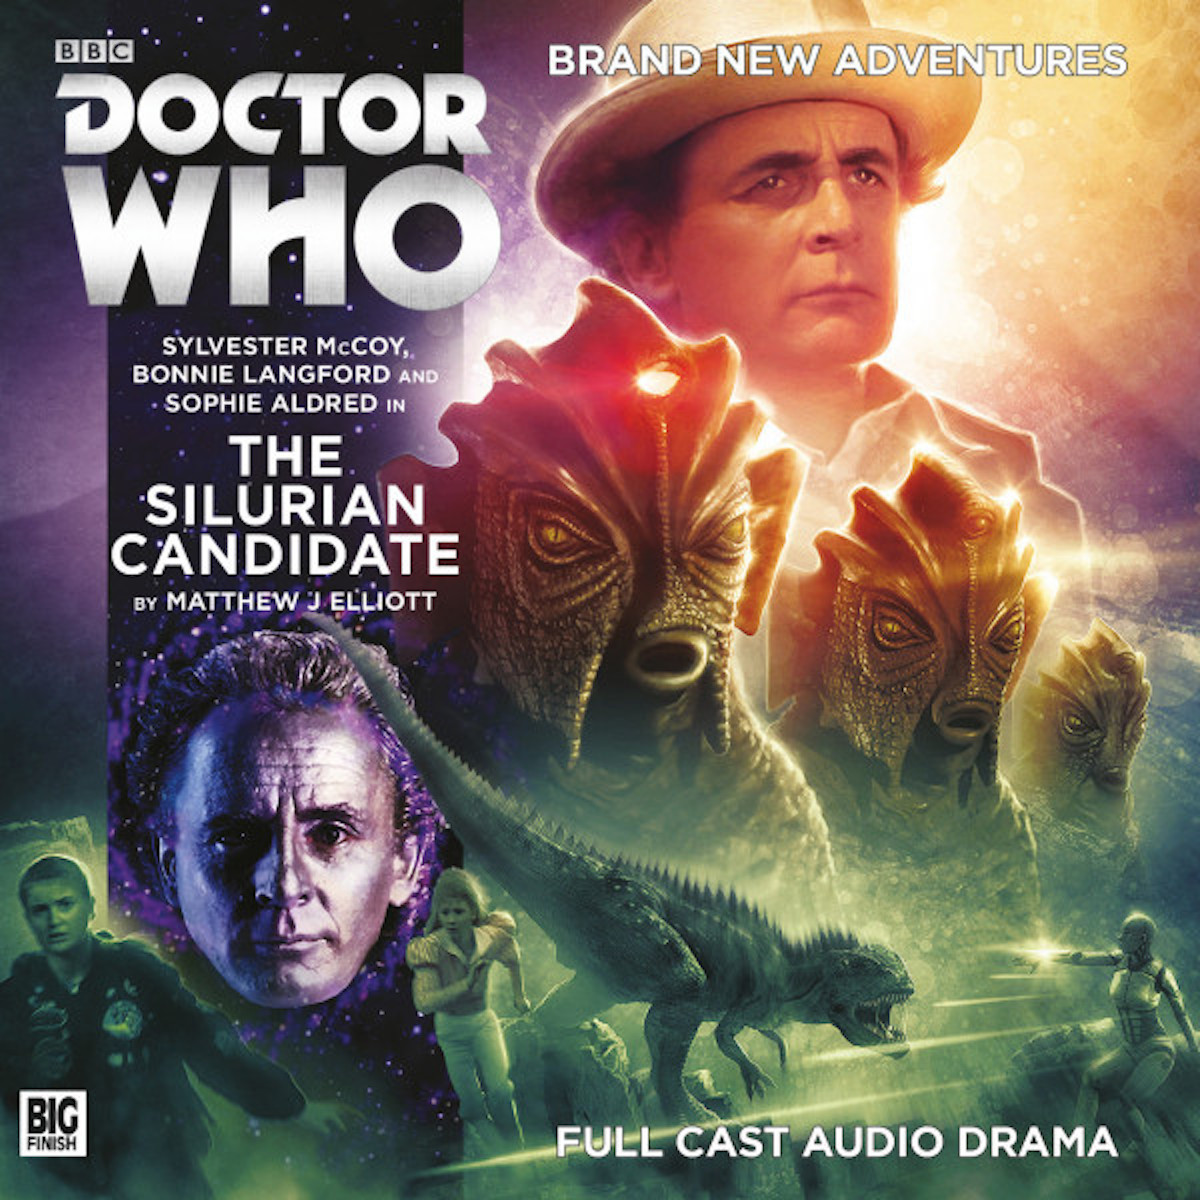 The Silurian Candidate